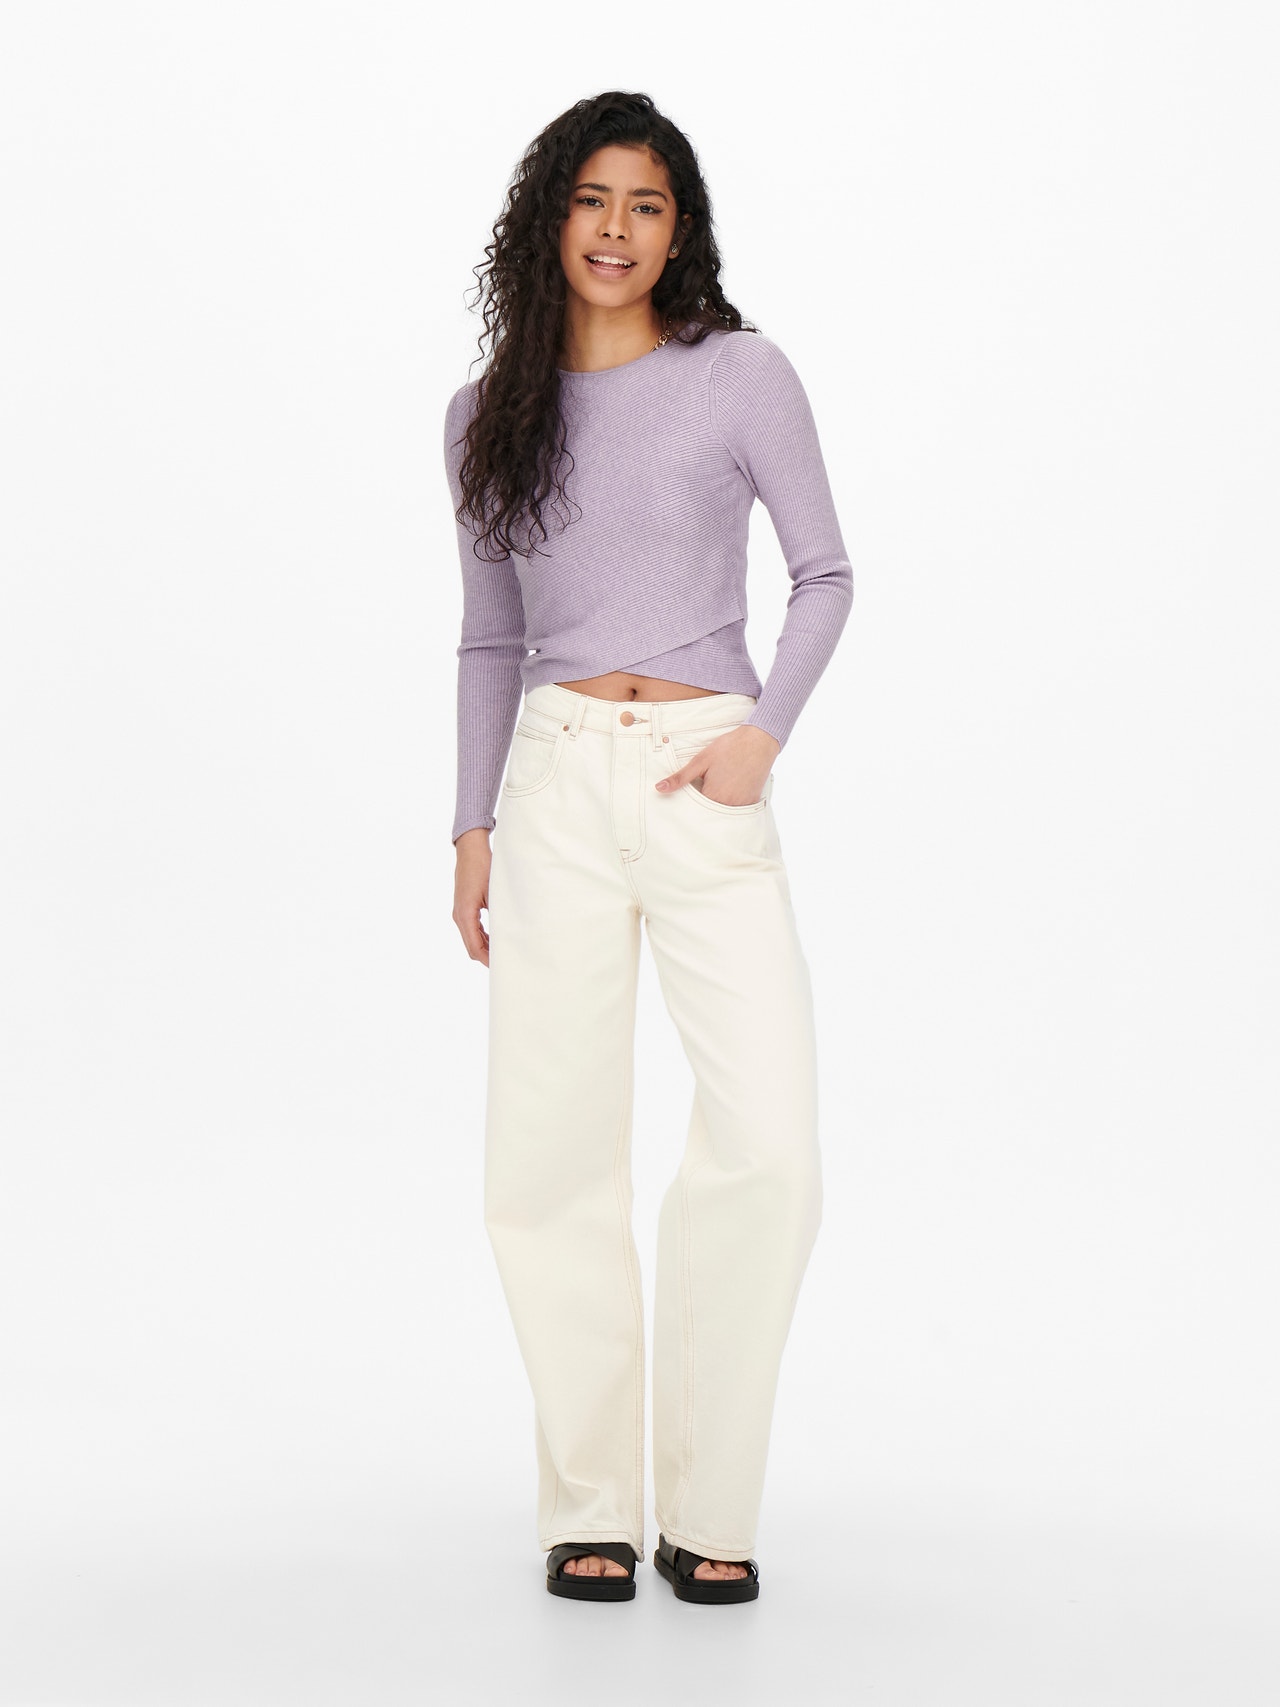 ONLY Knit Fit Rundhals Pullover -Pastel Lilac - 15250619